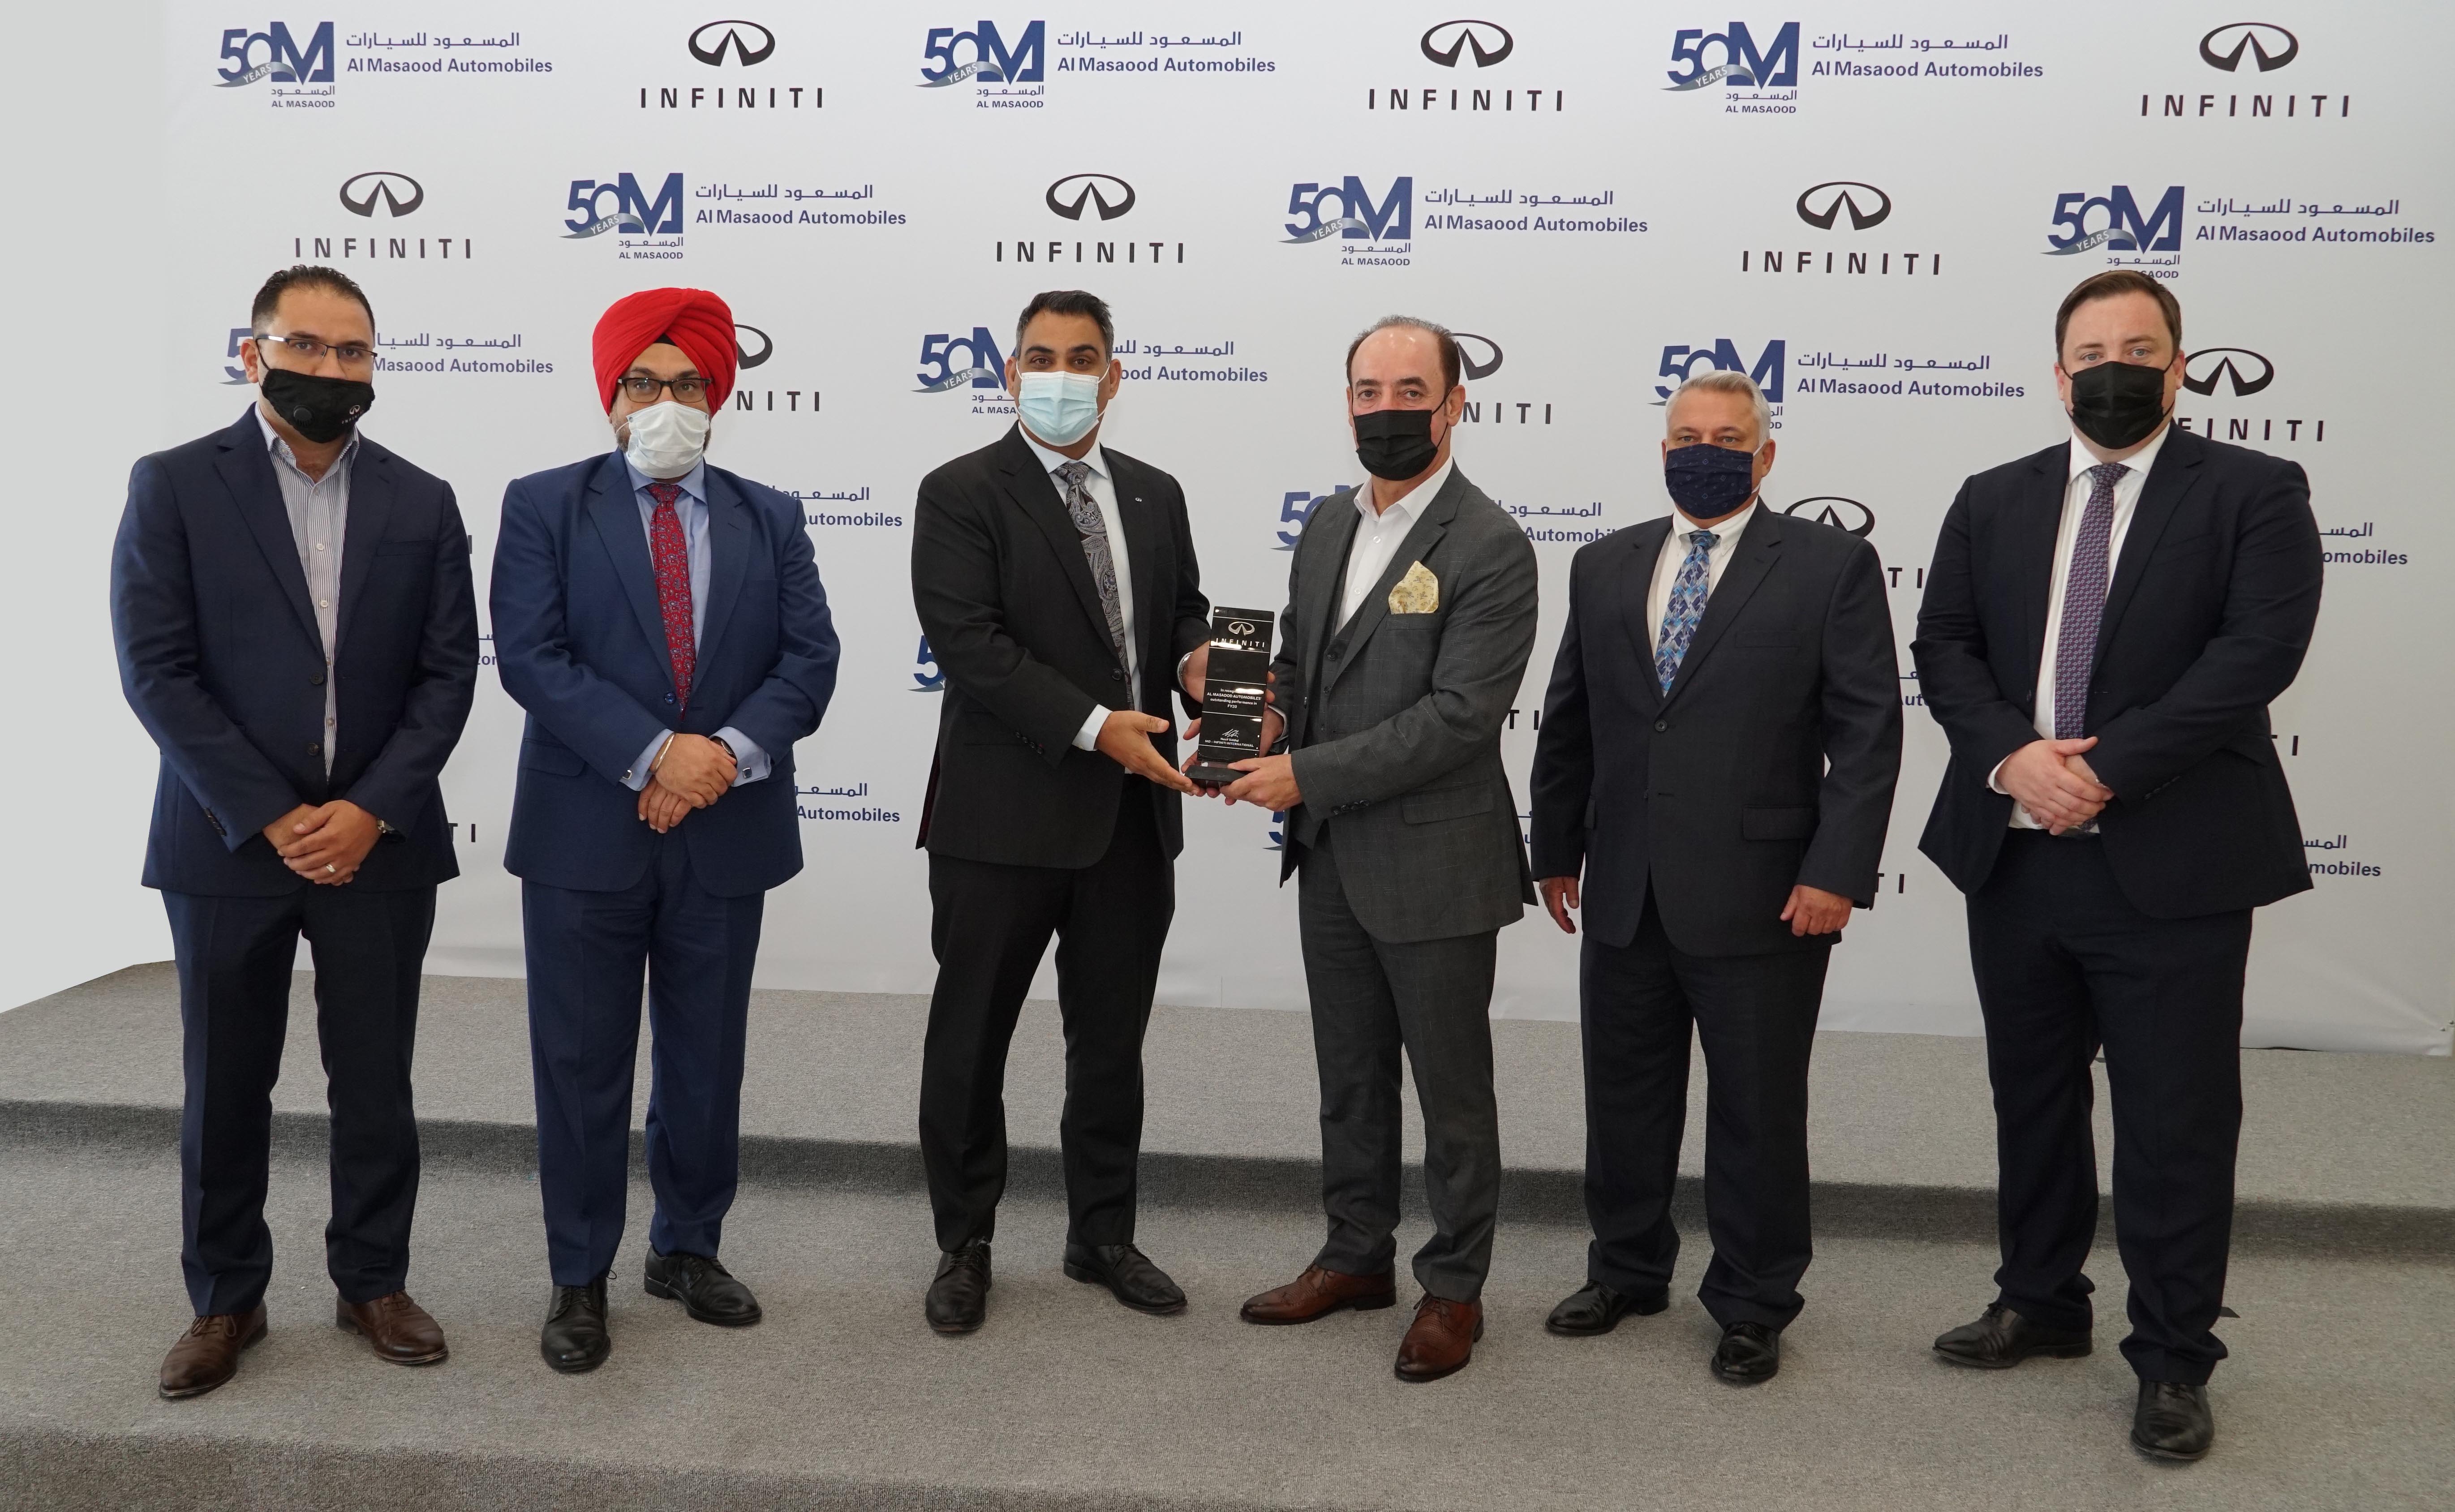 Al Masaood Automobiles INFINITI Records 10% Increase in Market Share During Pandemic Year 